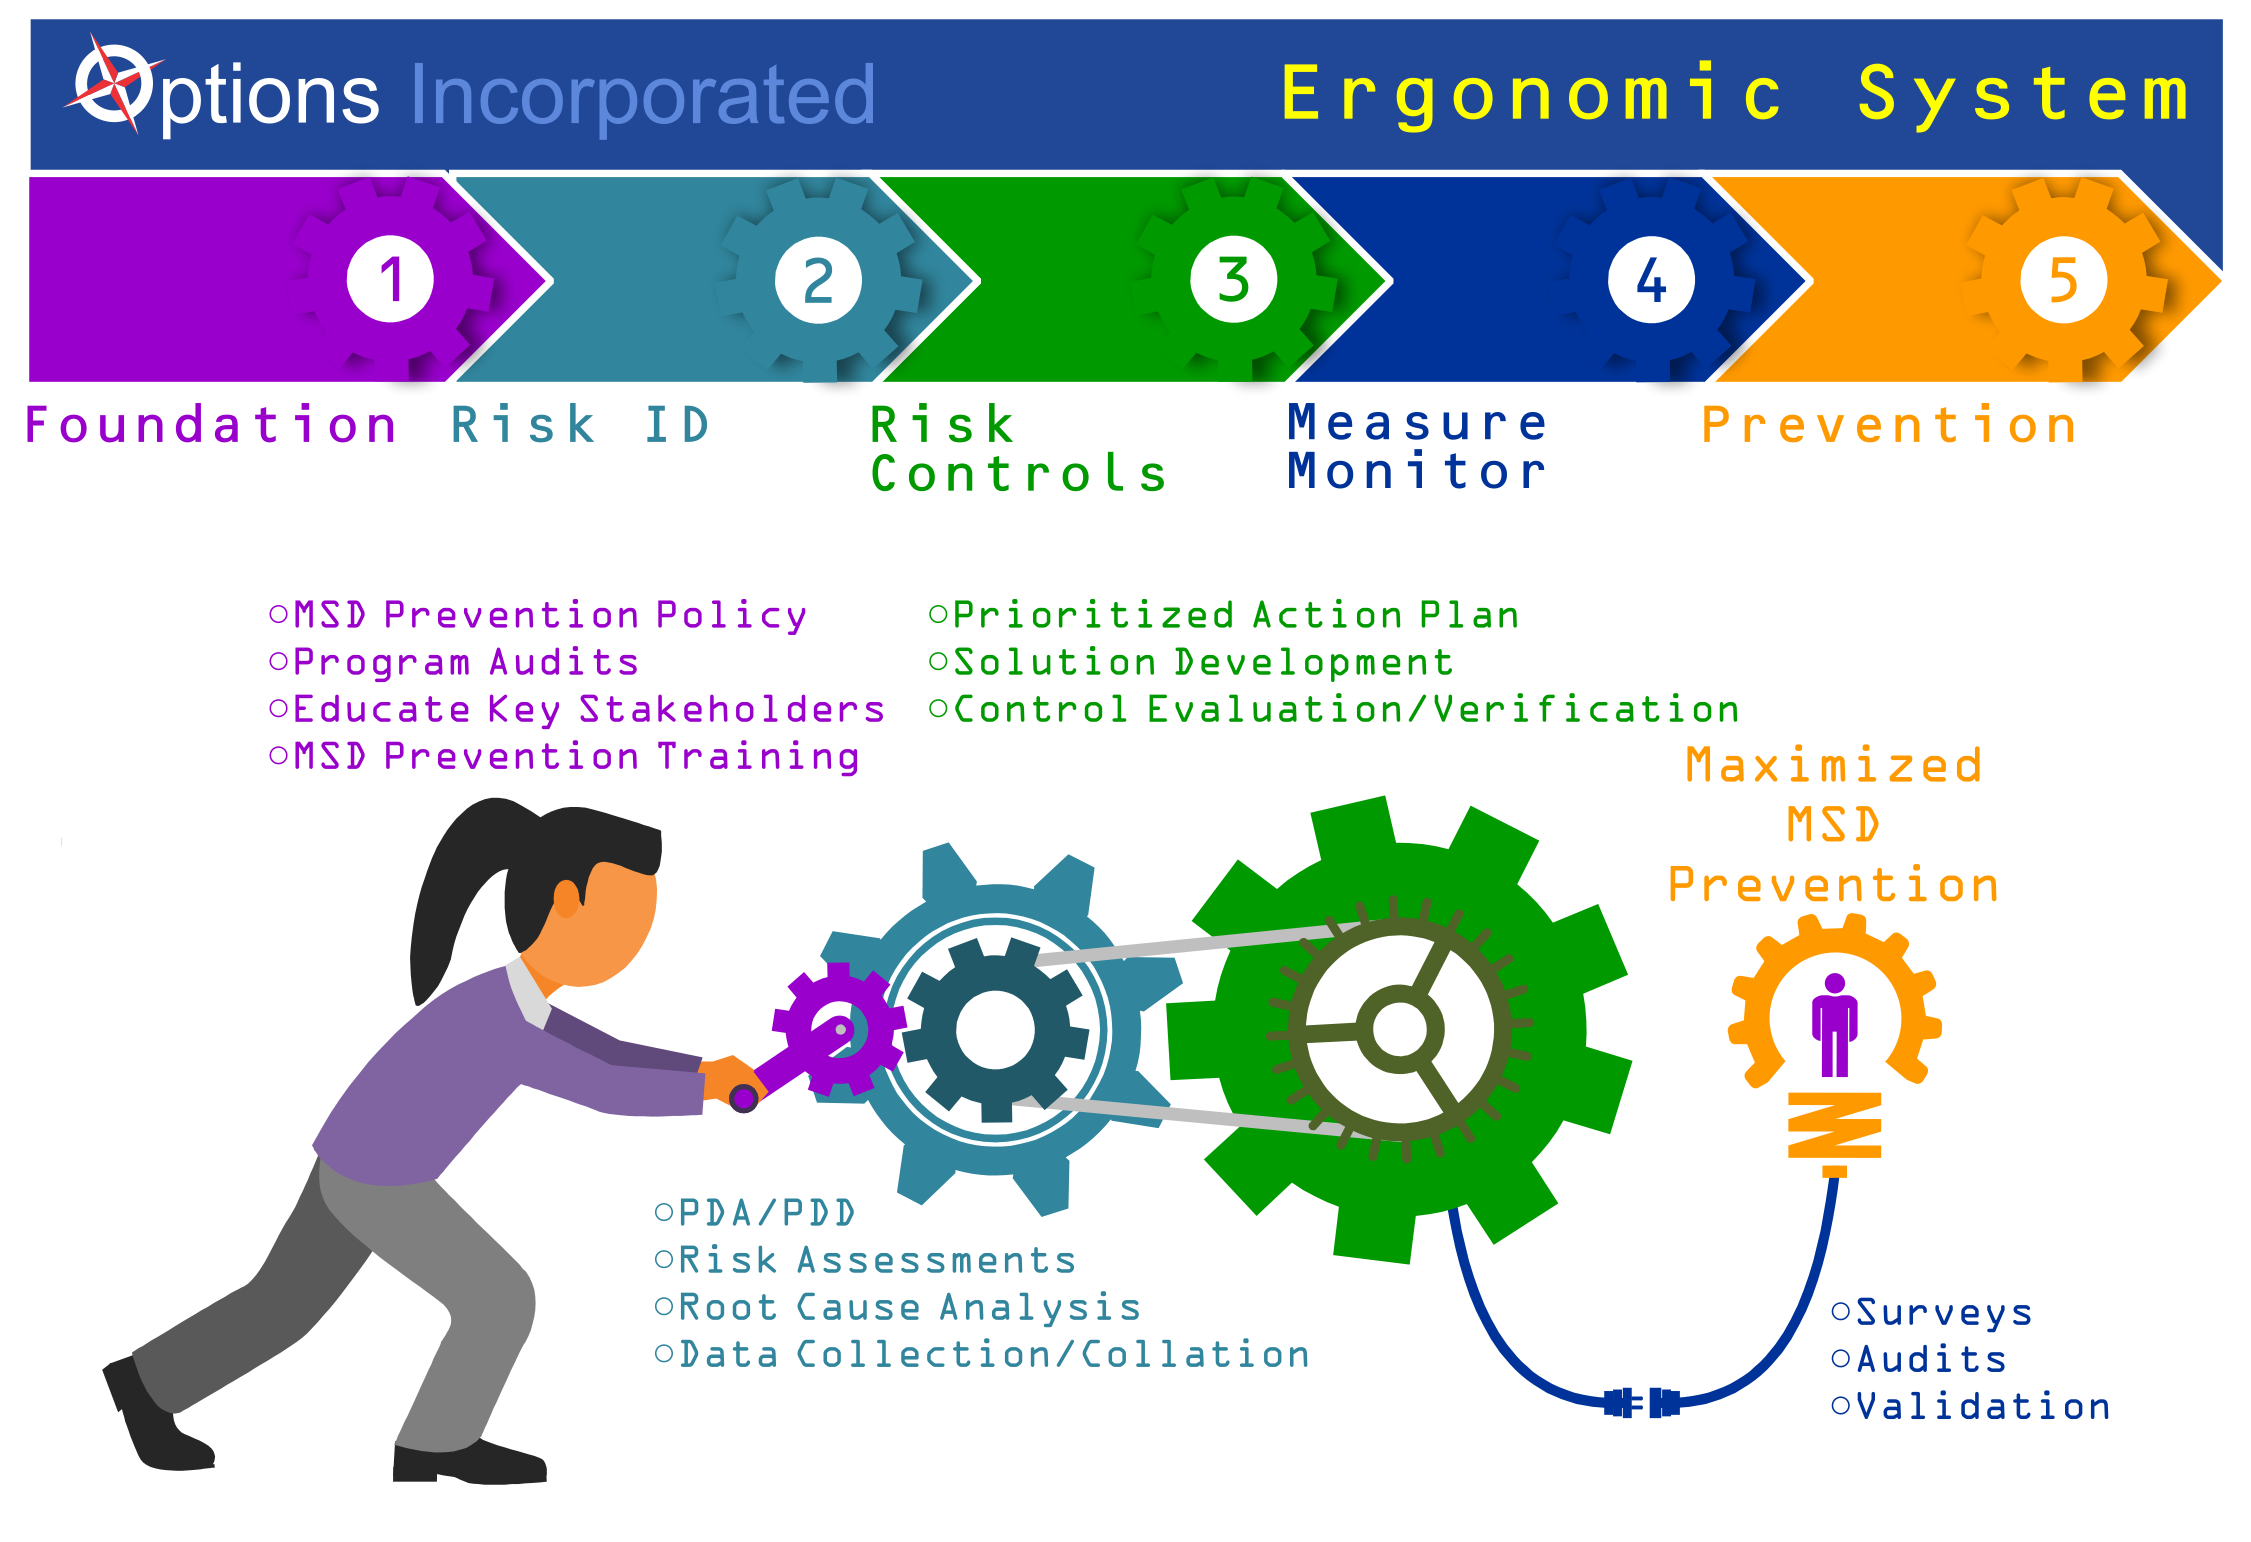 Options Incorporated Ergonomic System Infographic